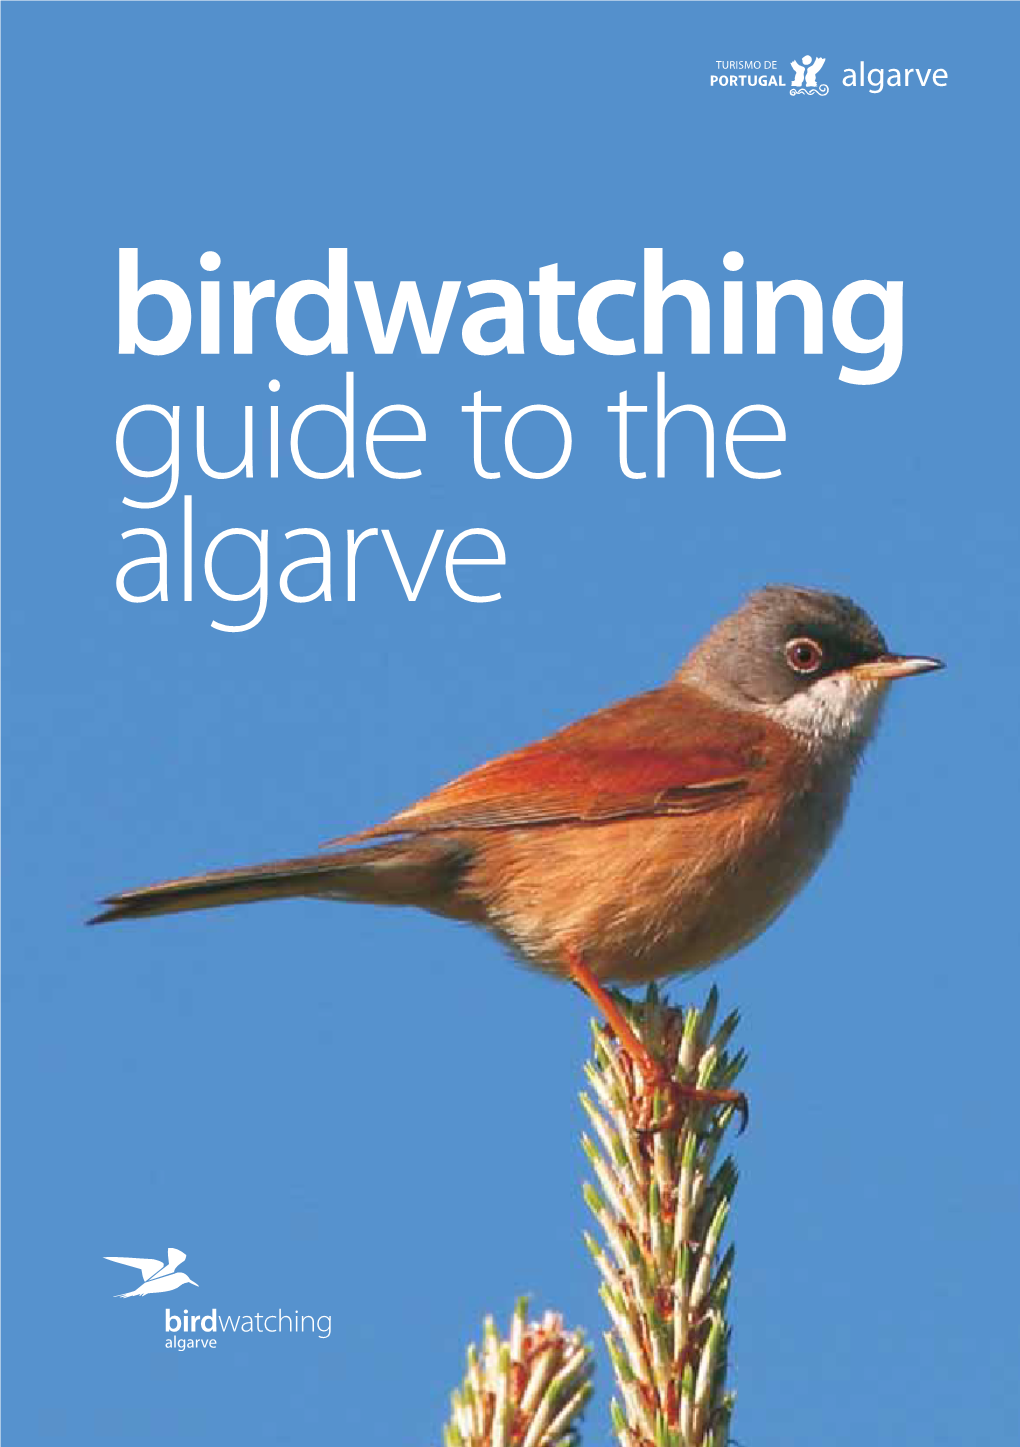 Birdwatching Guide to the Algarve Contents Preface